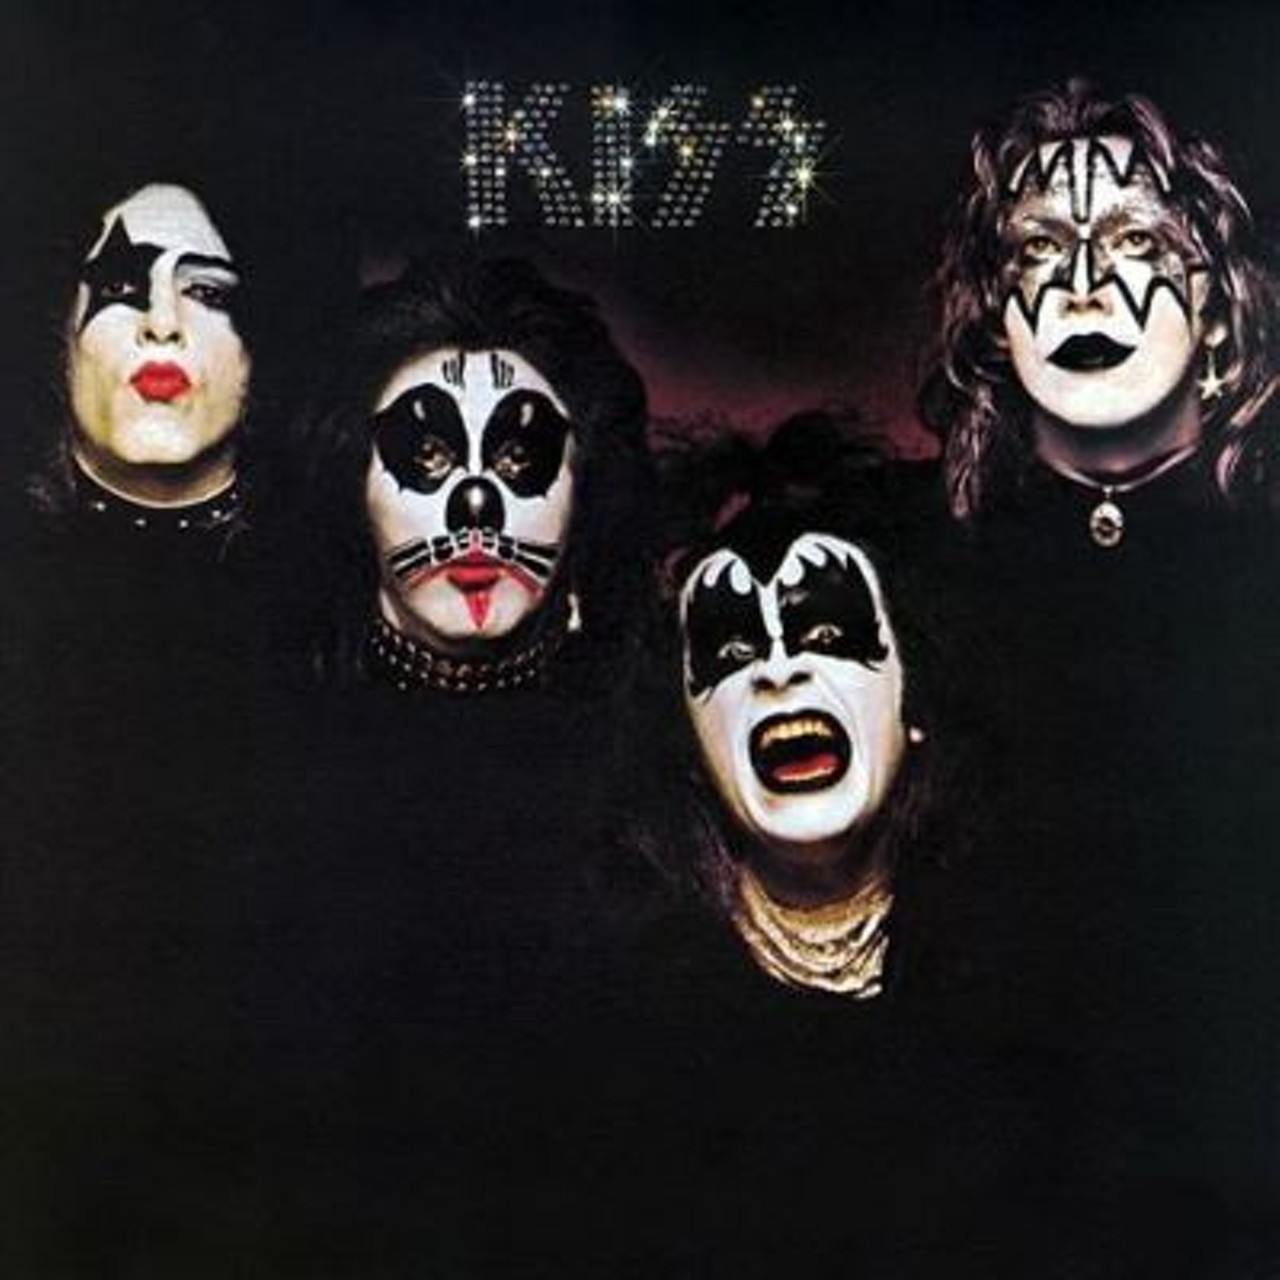 KISS’s first record has aged really well. It’s a fun album that blends glam-rock with Raspberries-flavored power-pop. It includes KISS essentials like “Strutter,” “Deuce,” “Firehouse” and “Black Diamond” . . . The record did not chart on Billboard until two years after its release, but it’s a solid debut for a band eyeing global domination.